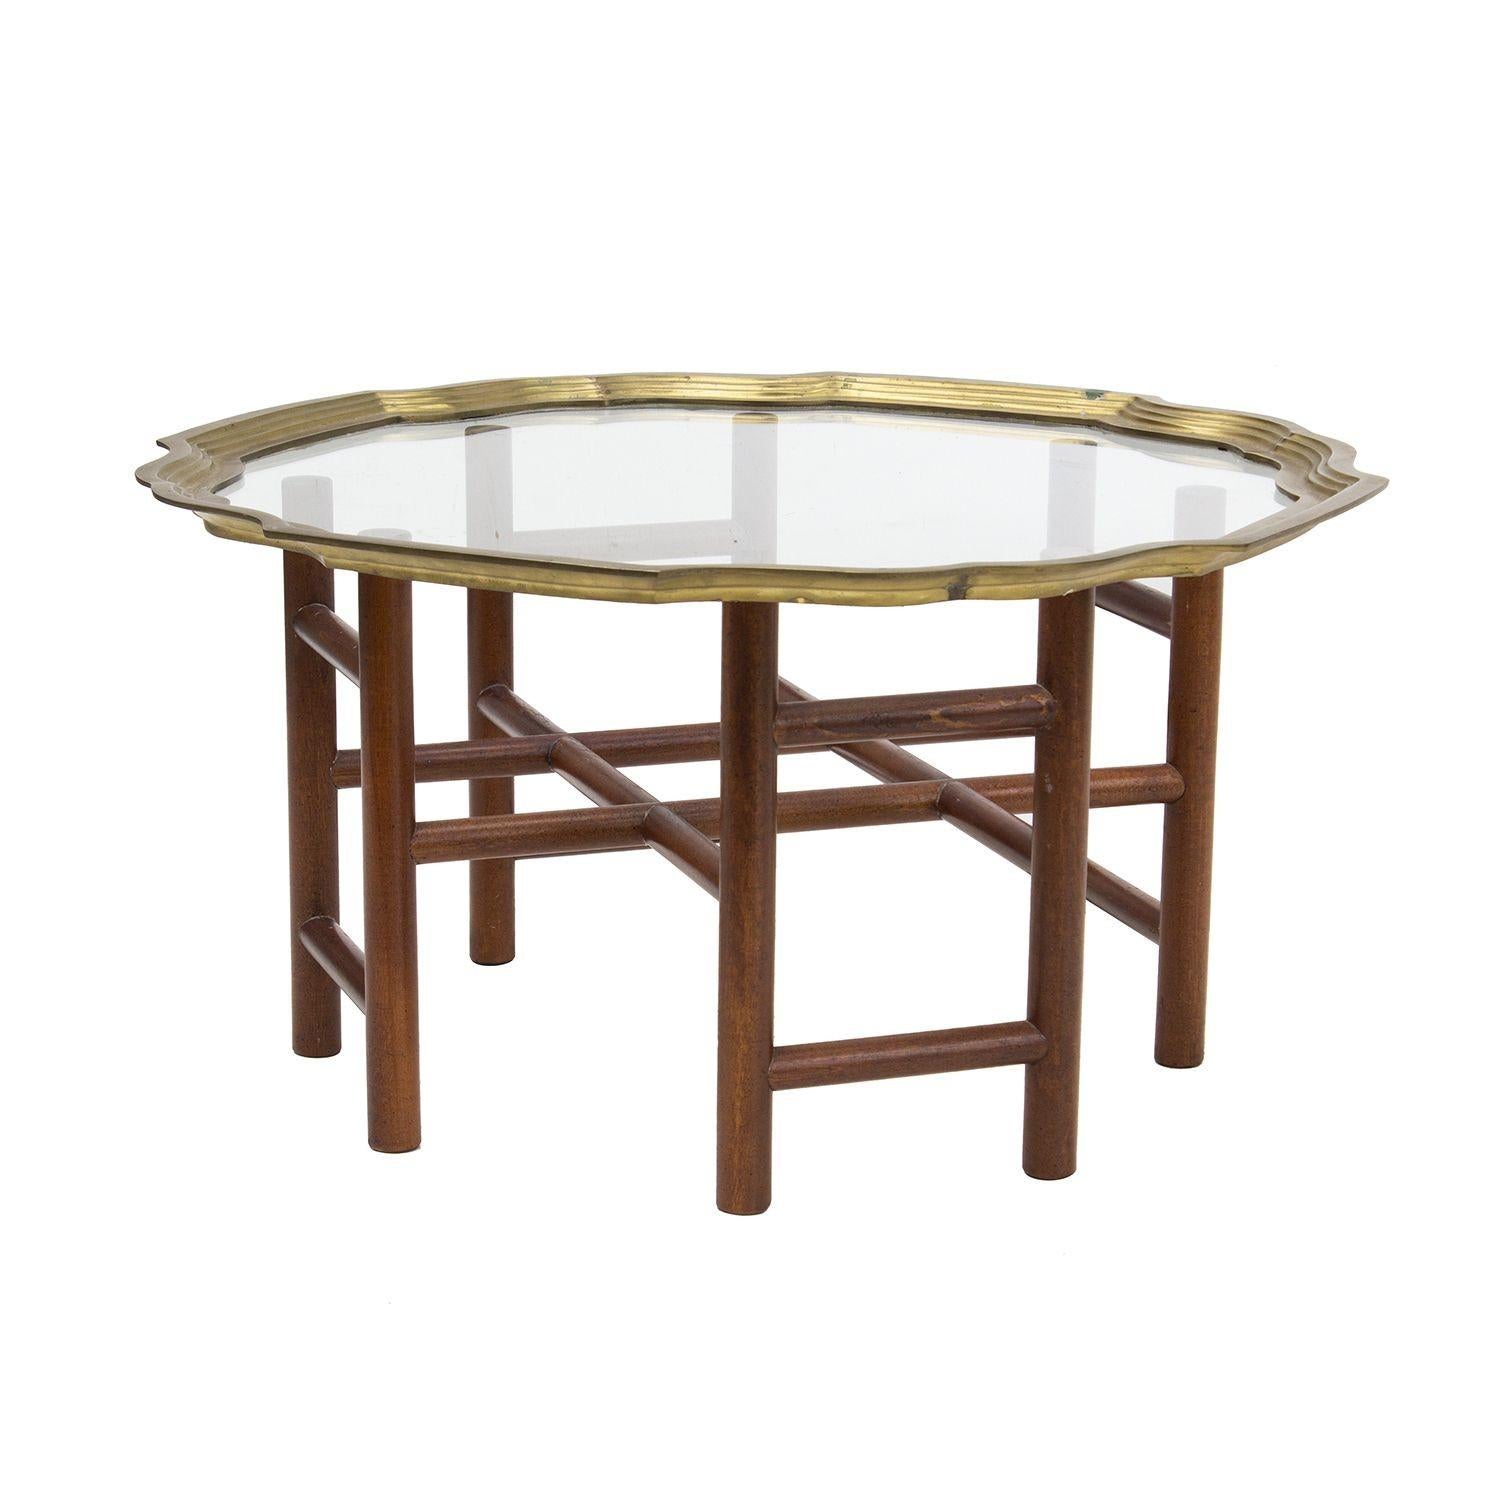 USA, 1970s
Baker style petite tray top table. Solid mahogany lattice base, glass top rimmed in brass. Unusual smaller size for a cocktail table- would be great with two chairs in a smaller seating area.
Condition notes: Brass edges of tray top